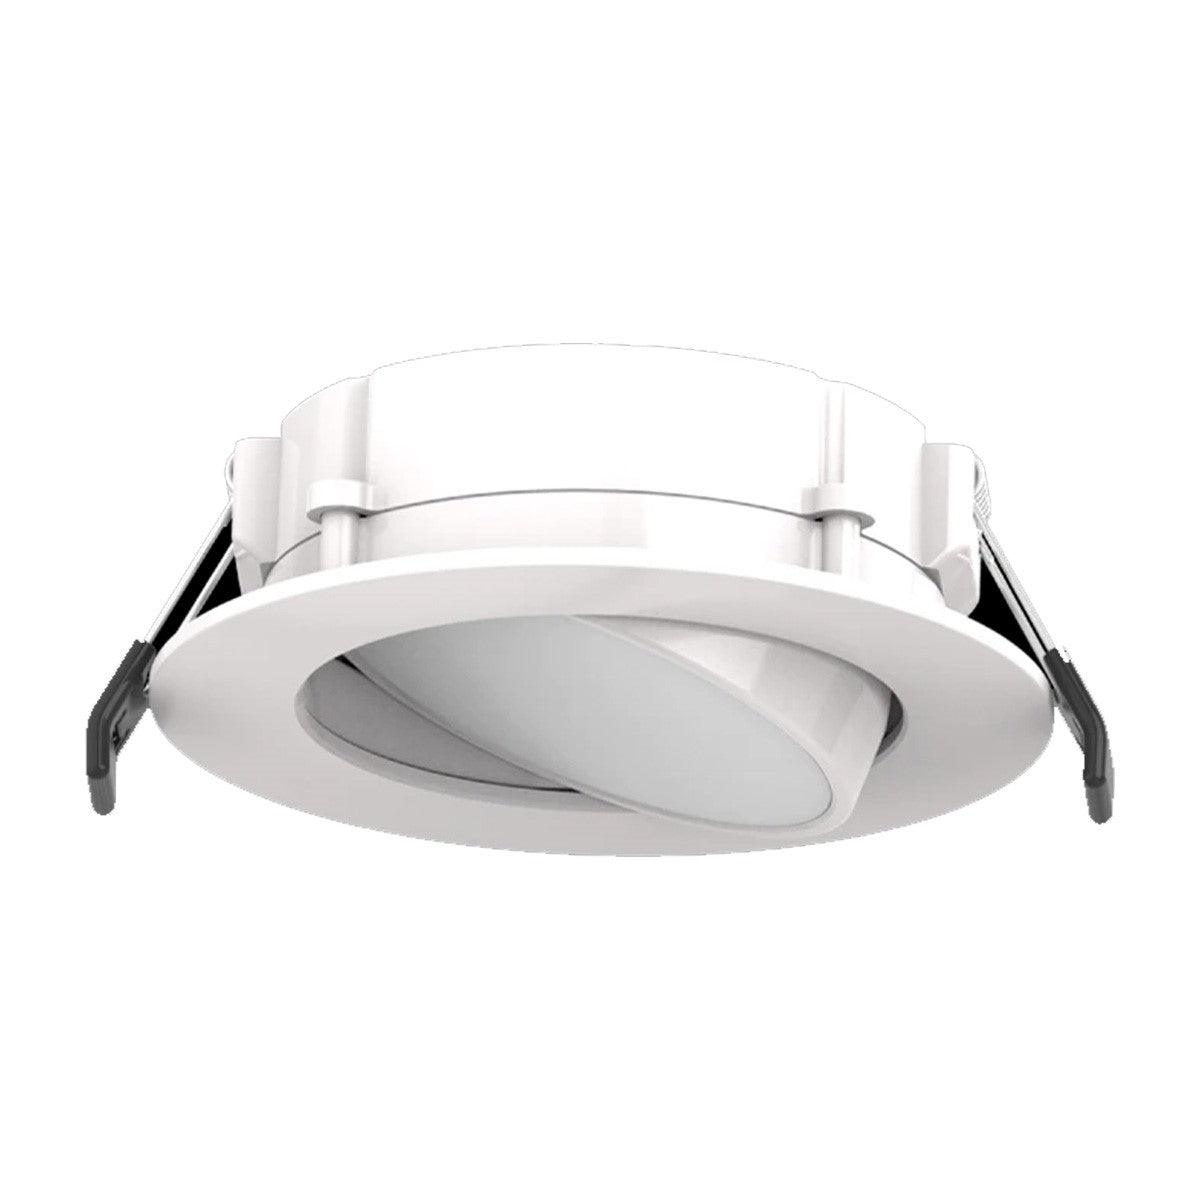 4 In. Adjustable Wafer Canless LED Recessed Light, 8 Watt, 700 Lumens, Selectable CCT, 2700K to 5000K, Smooth Trim